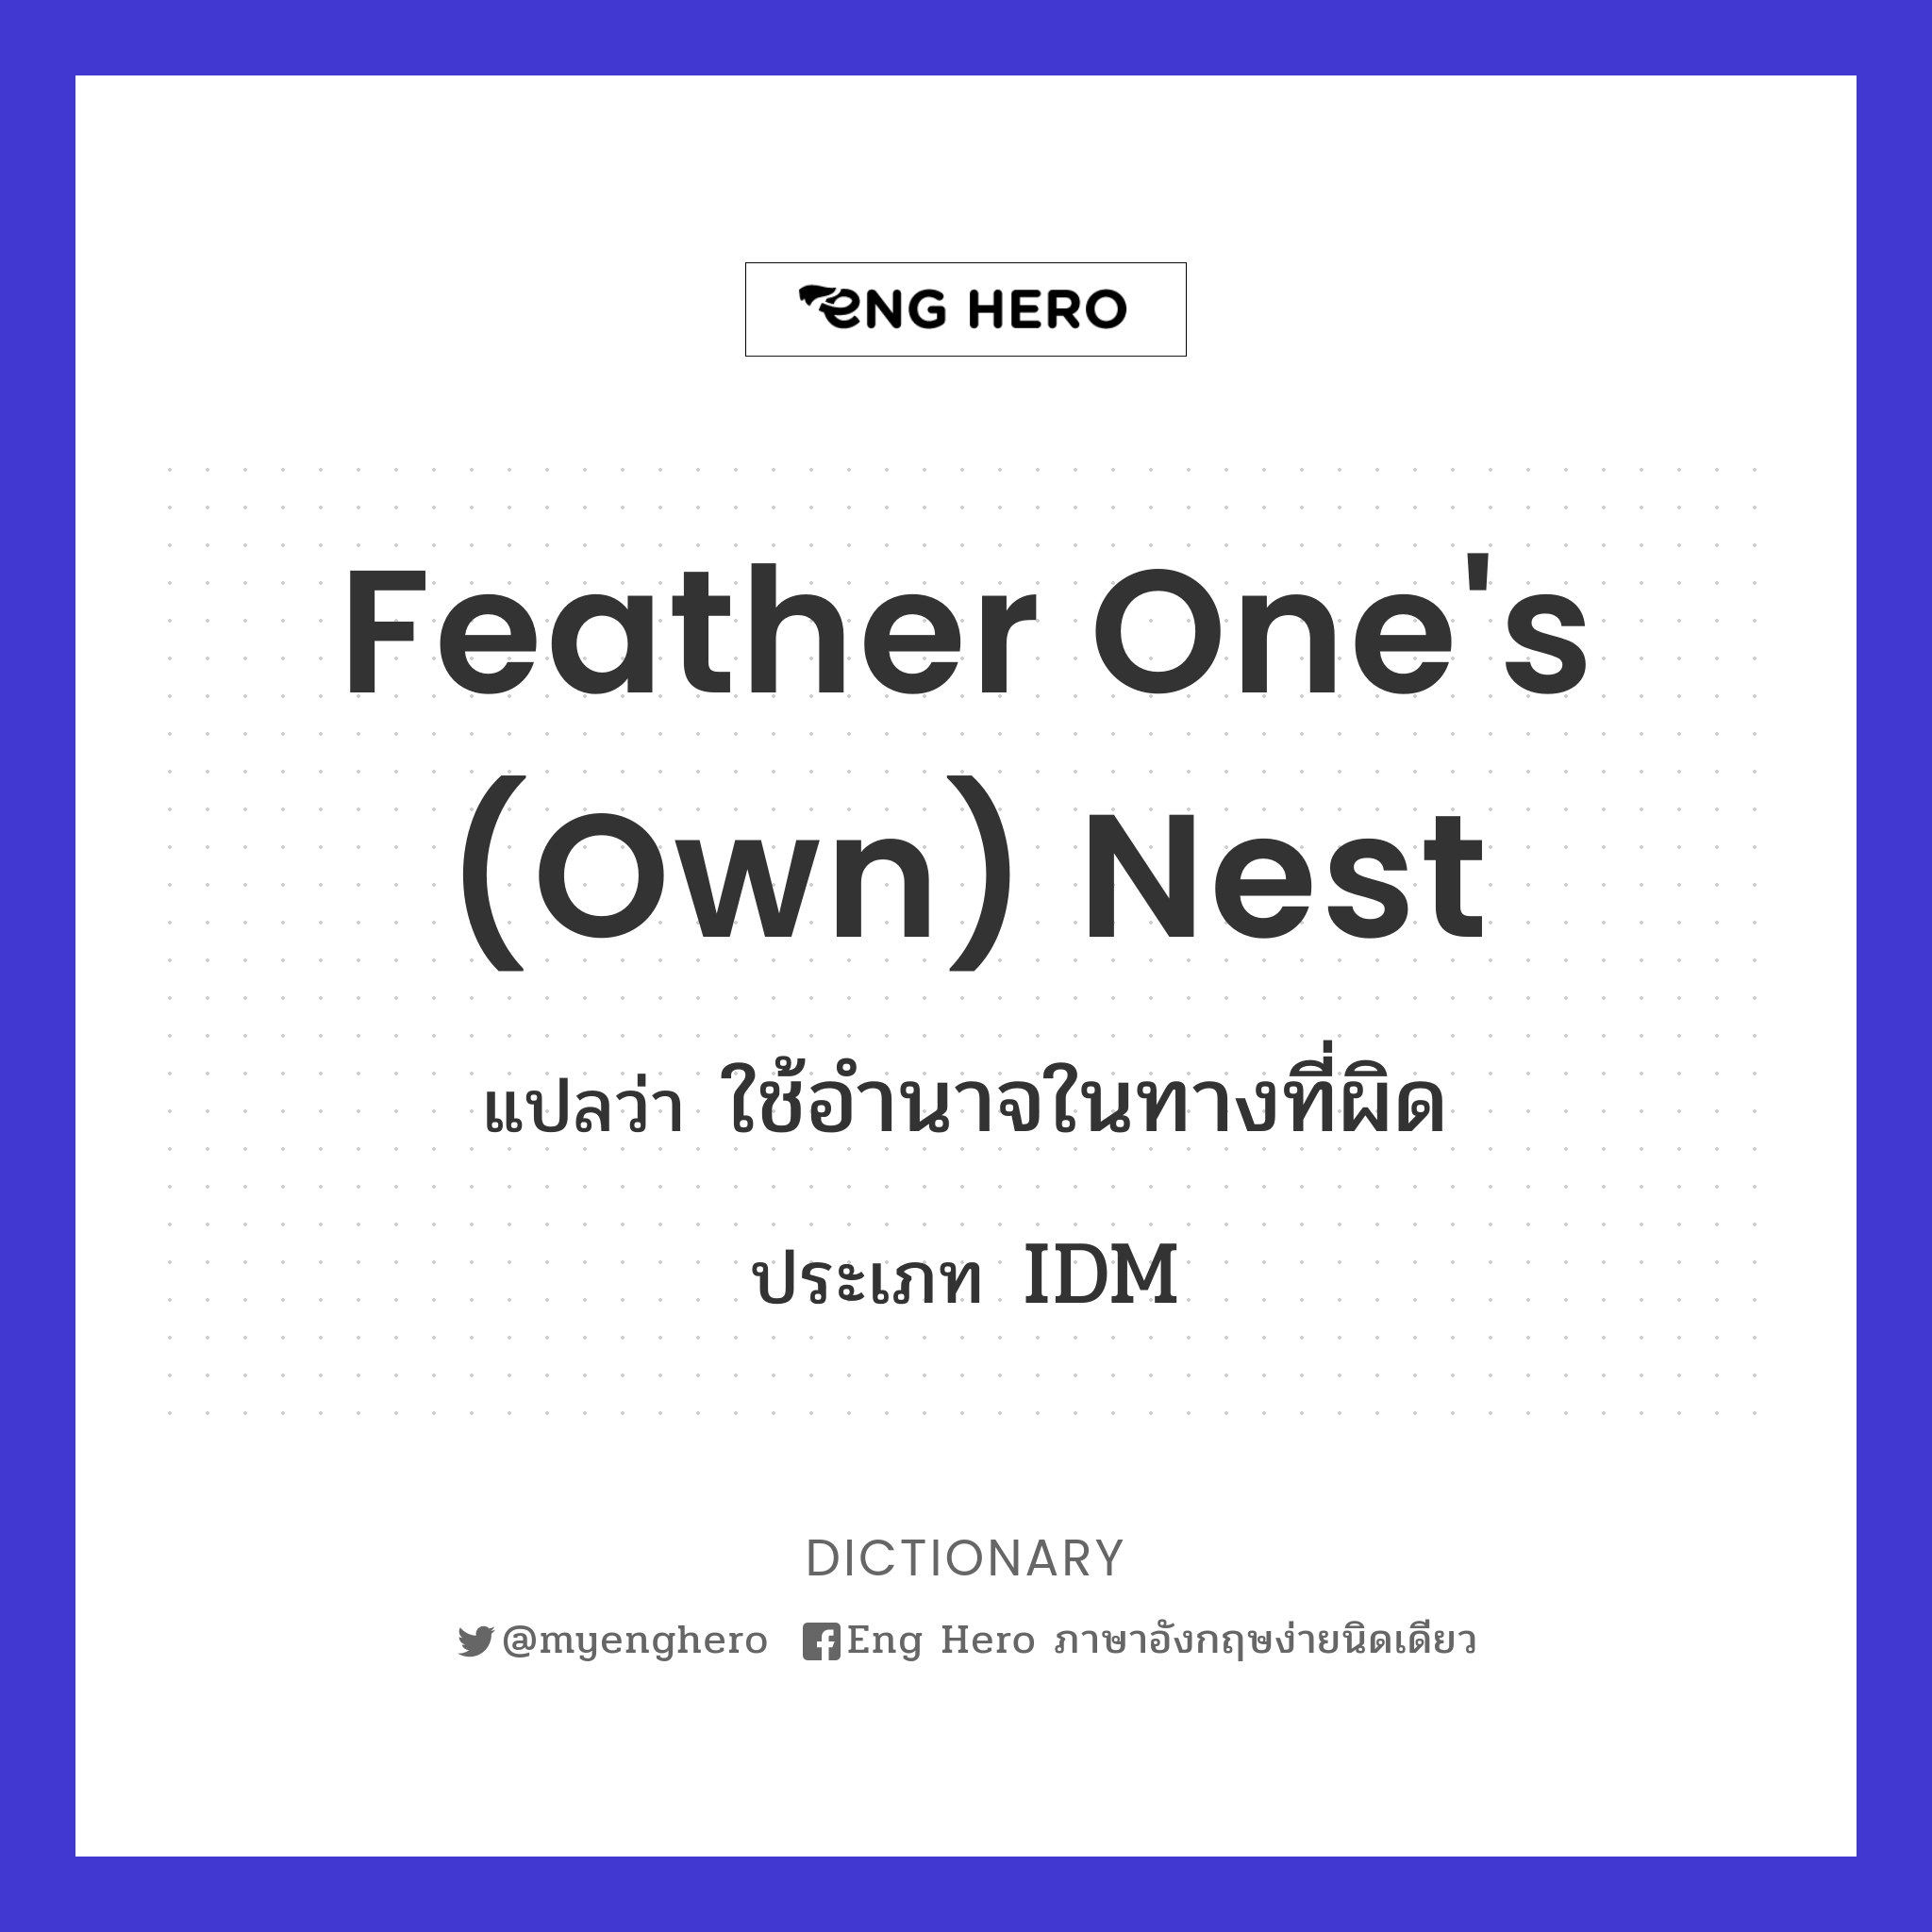 feather one's (own) nest